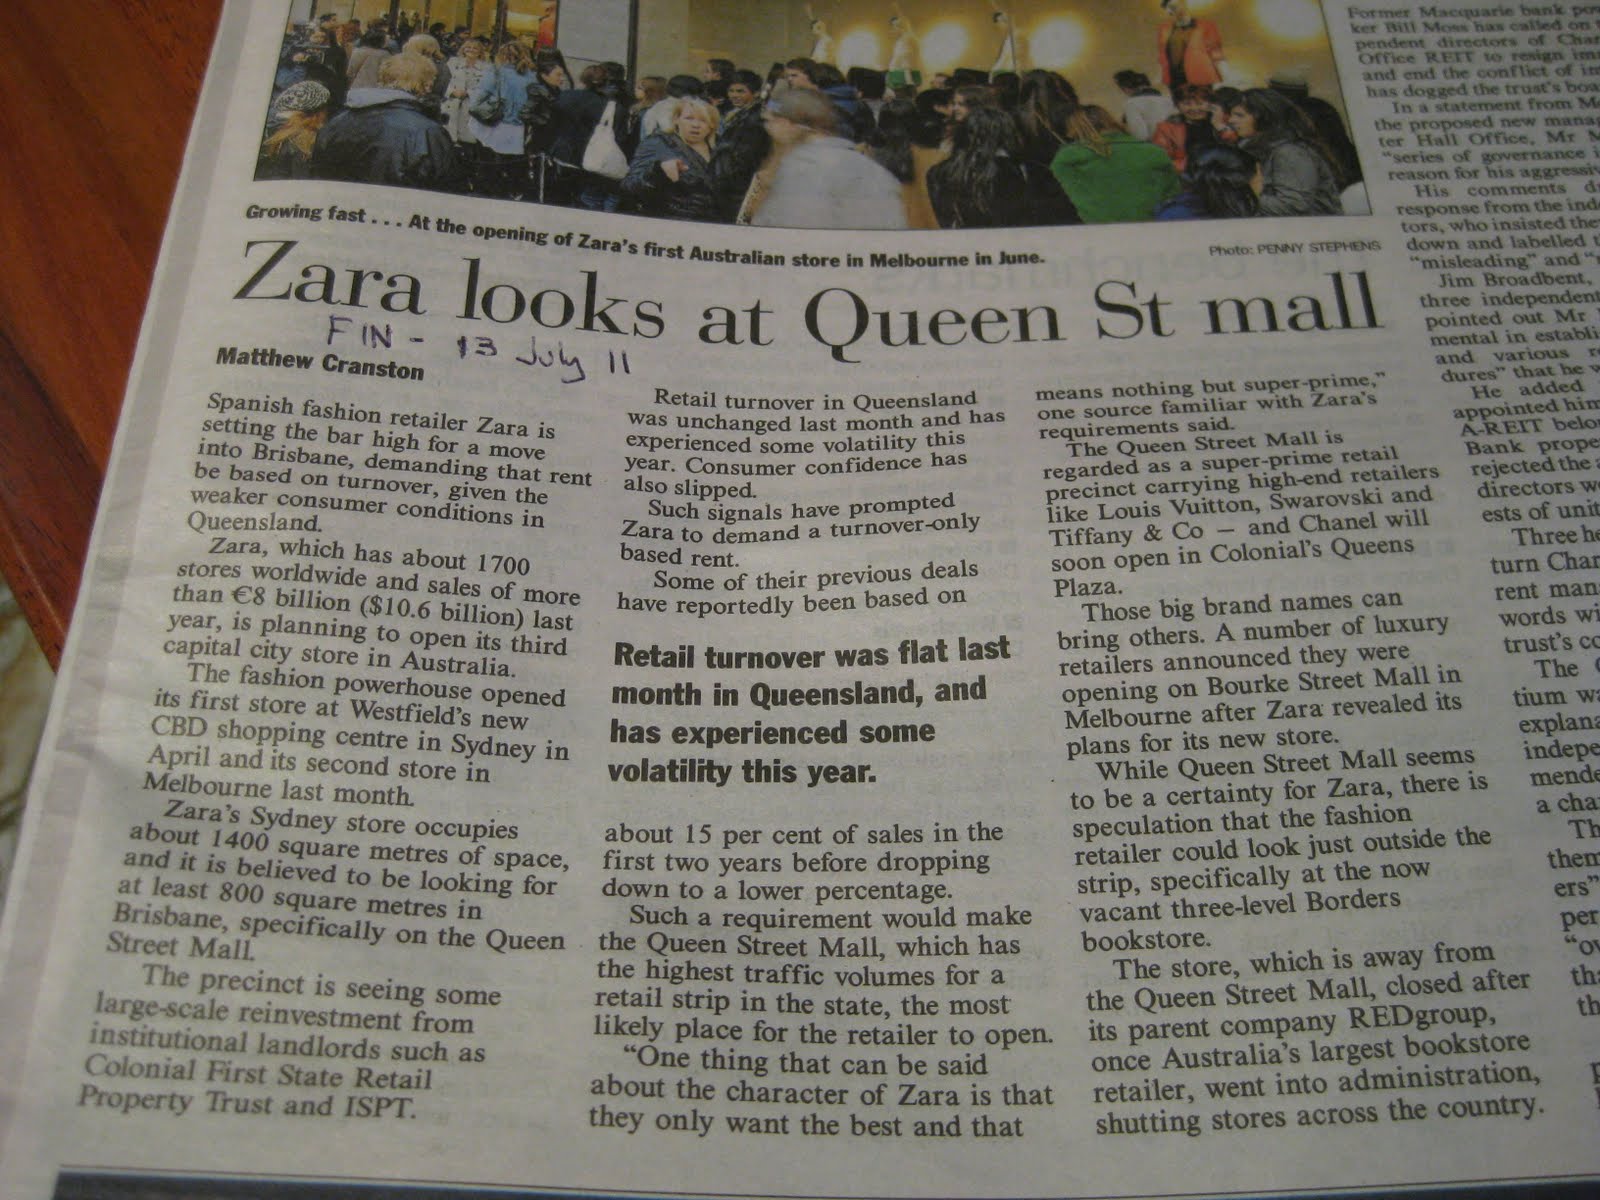 ... has reported that Zara is now looking to open a store in Queensland